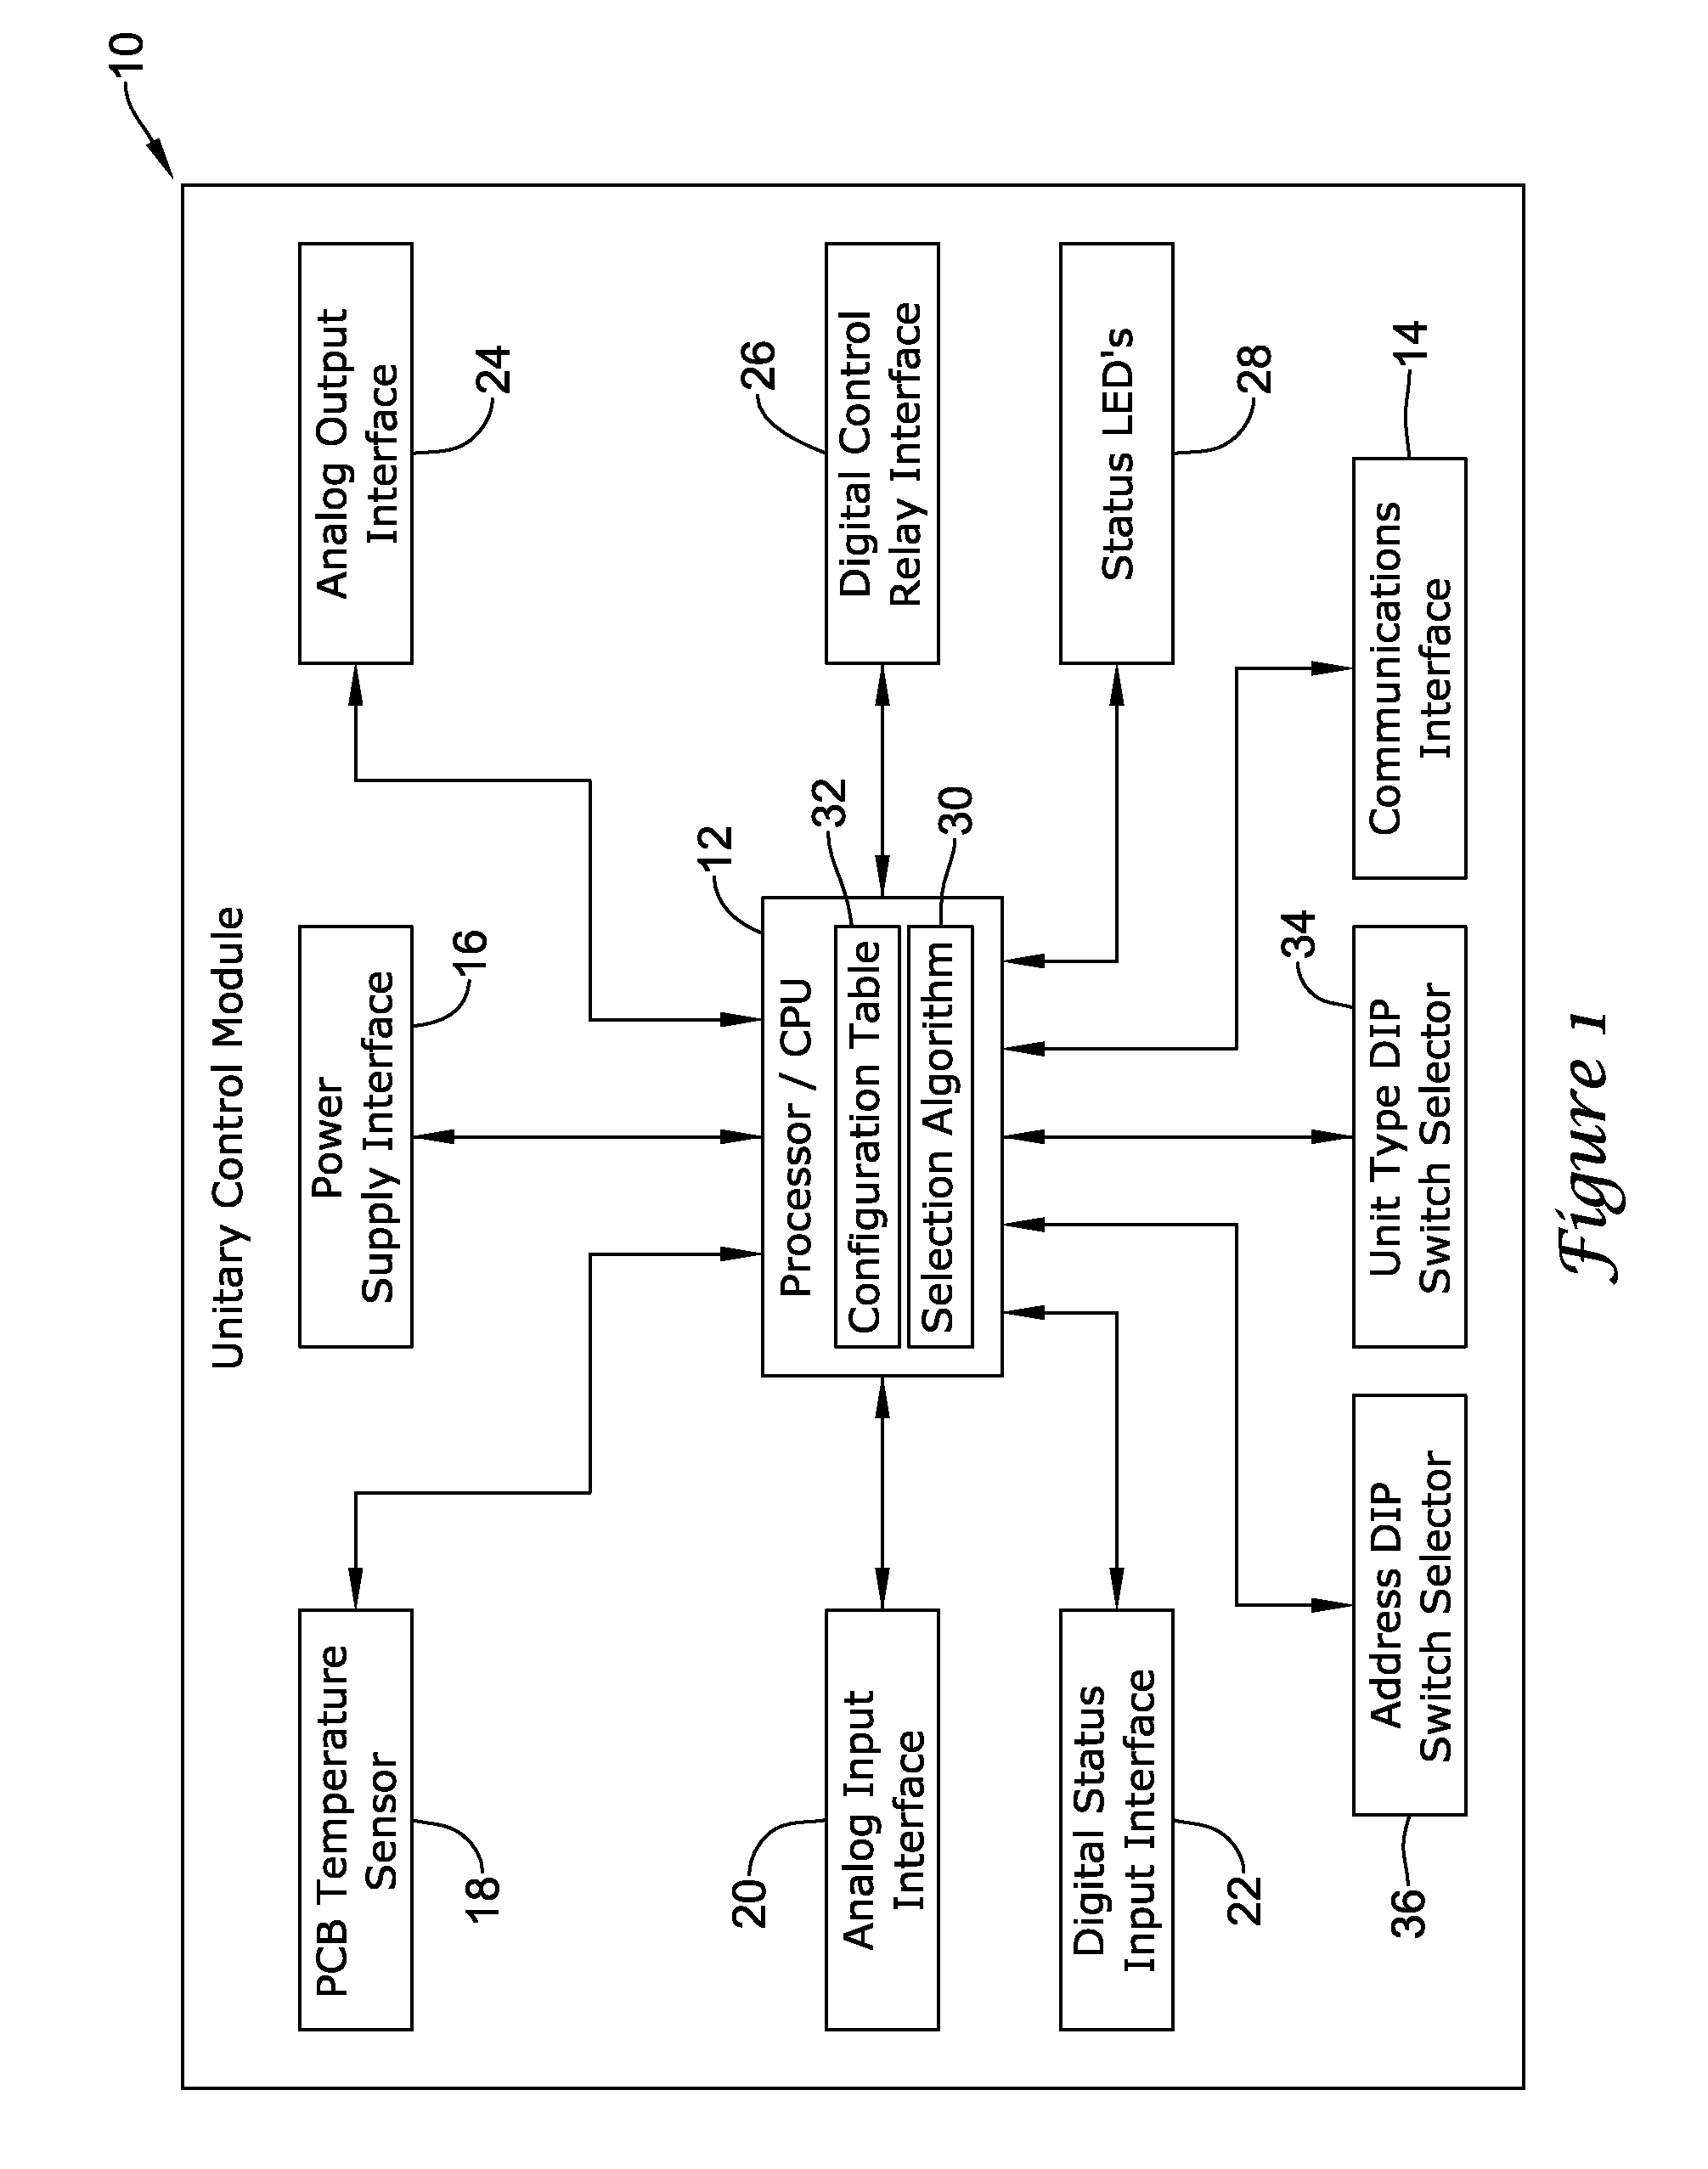 Unitary control module with adjustable input/output mapping